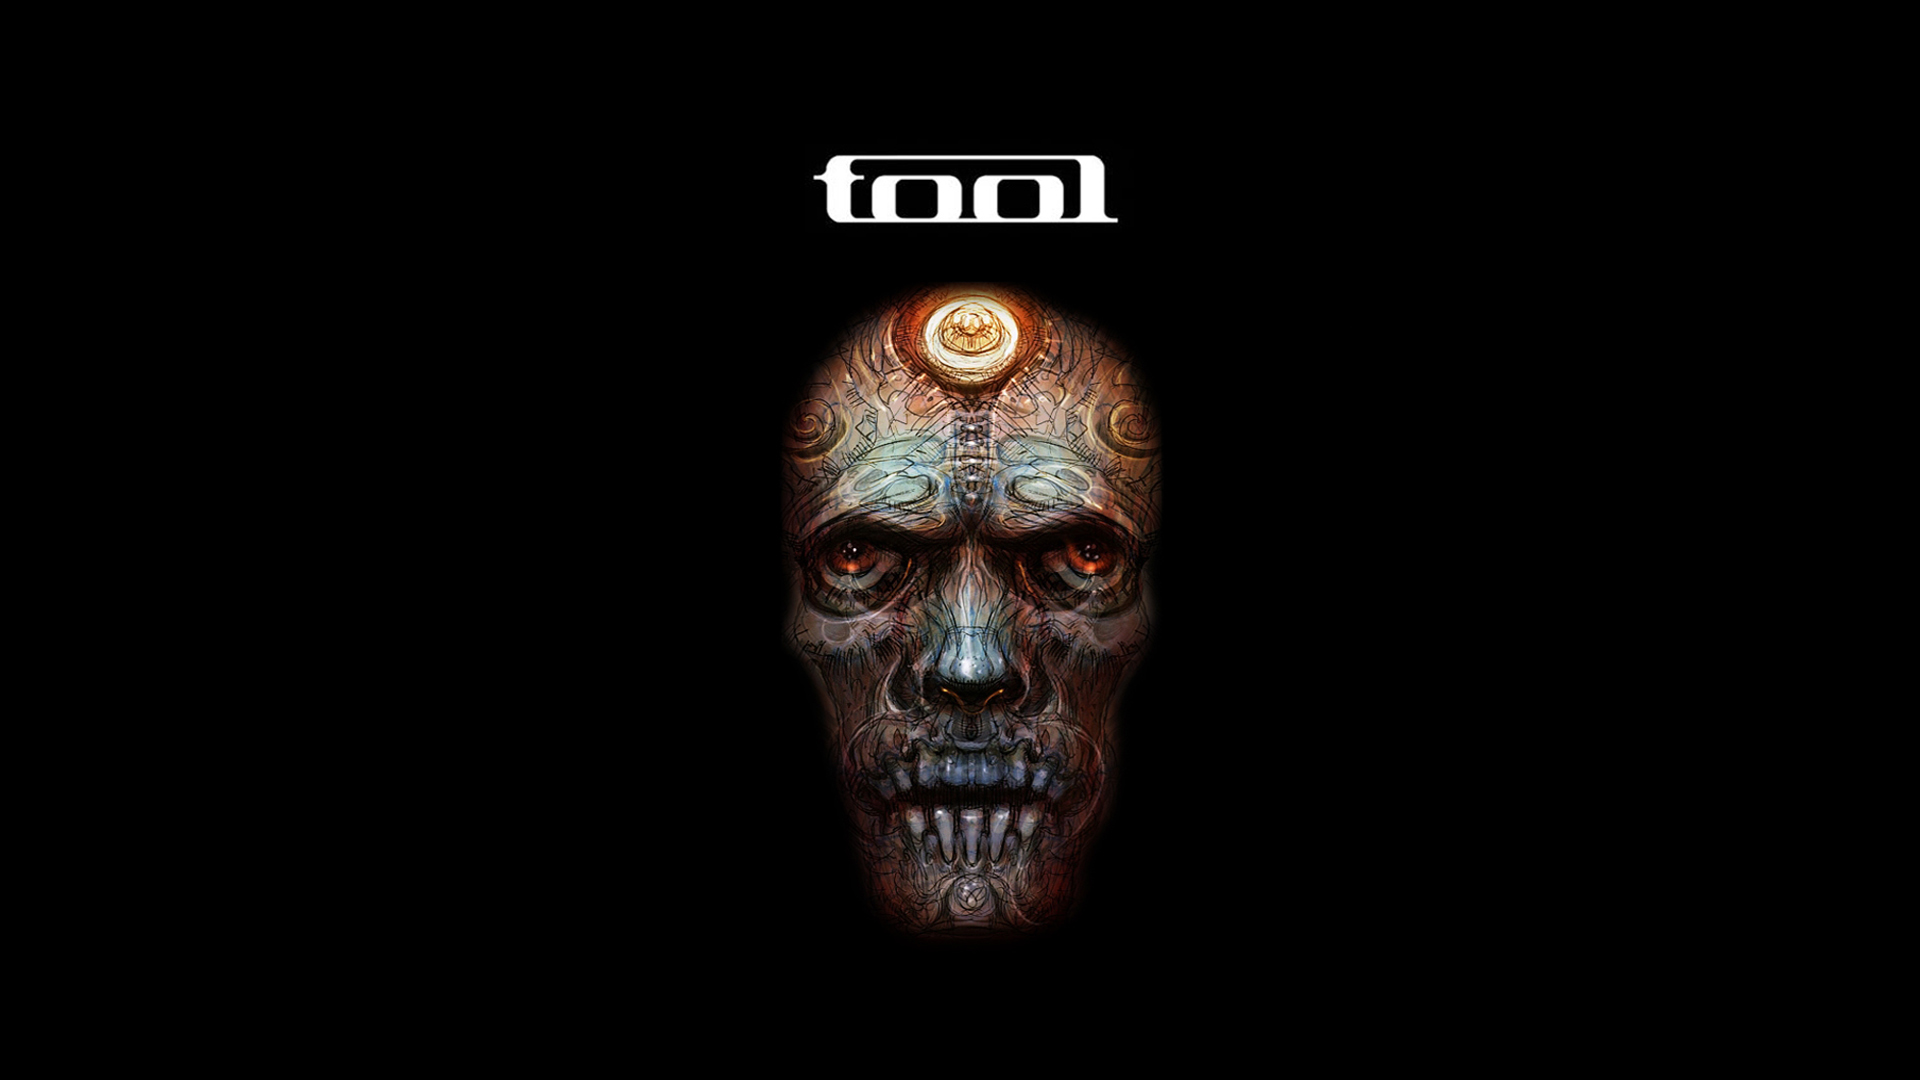 TOOL releasing double album “Decem” this fall and it’s over 2.5 hours long! #4